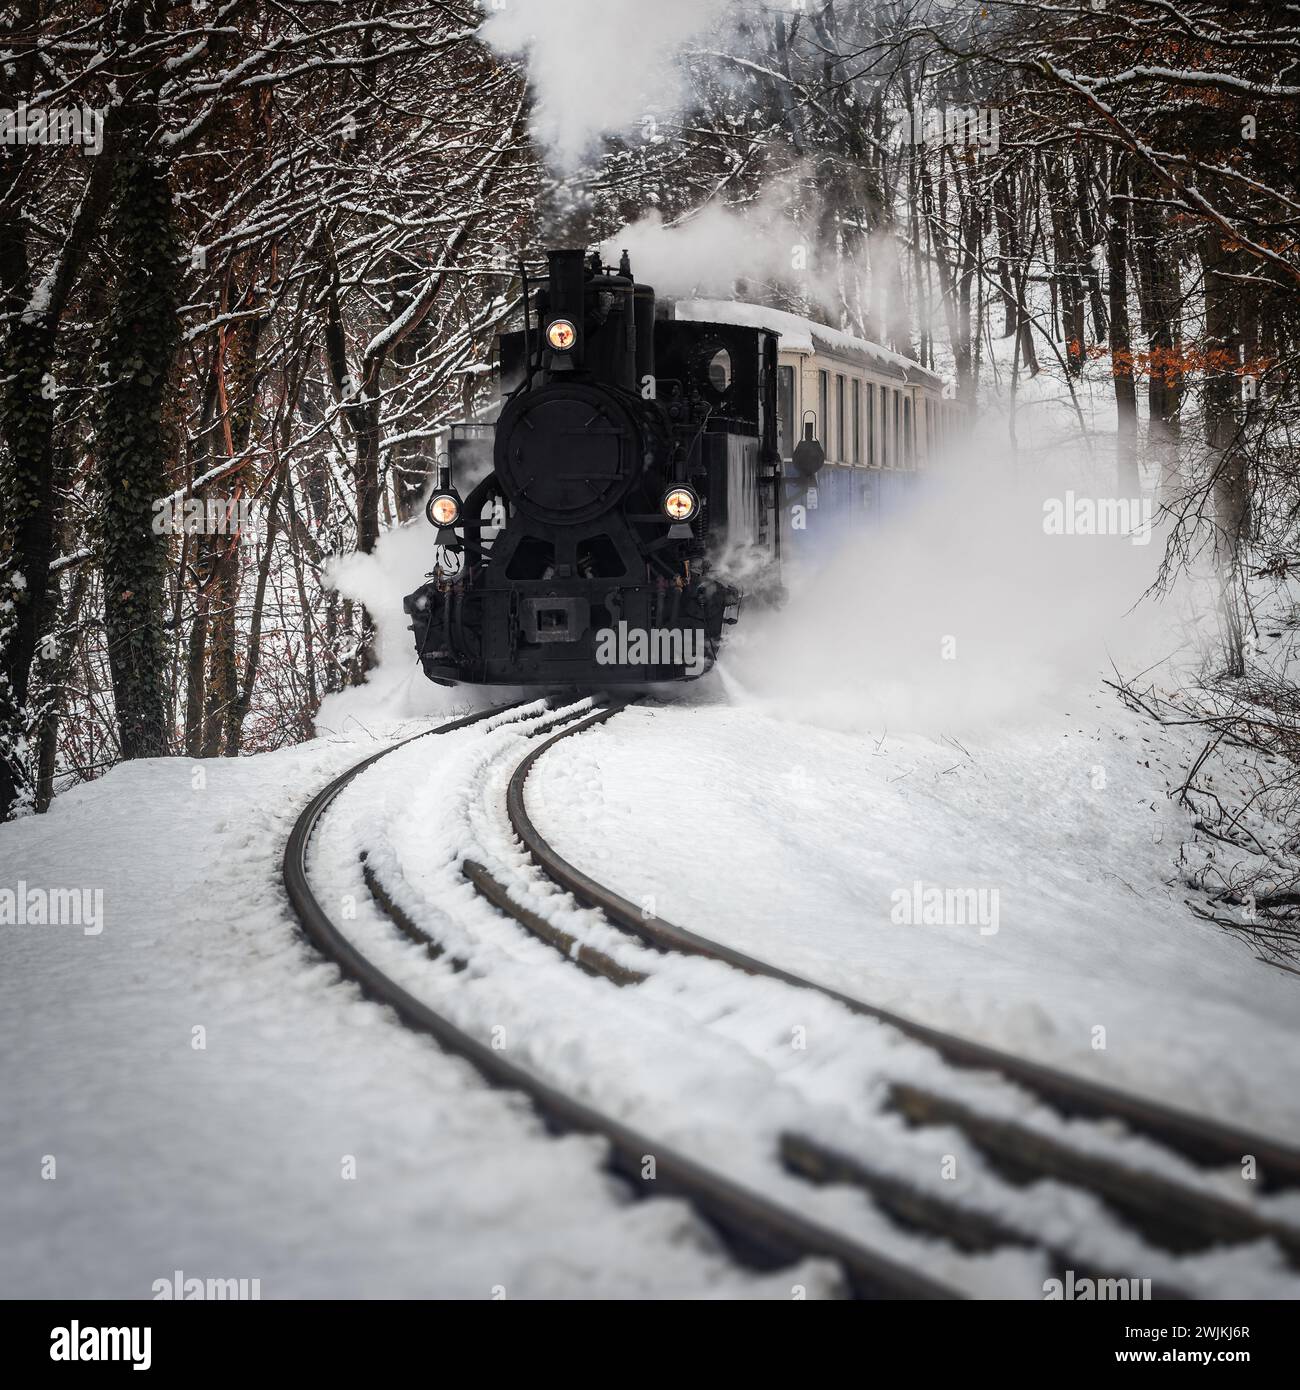 Budapest, Hungary - Beautiful winter forest scene with snowy forest and nostalgic steam tank engine train on the track in the Buda Hills near Huvosvol Stock Photo